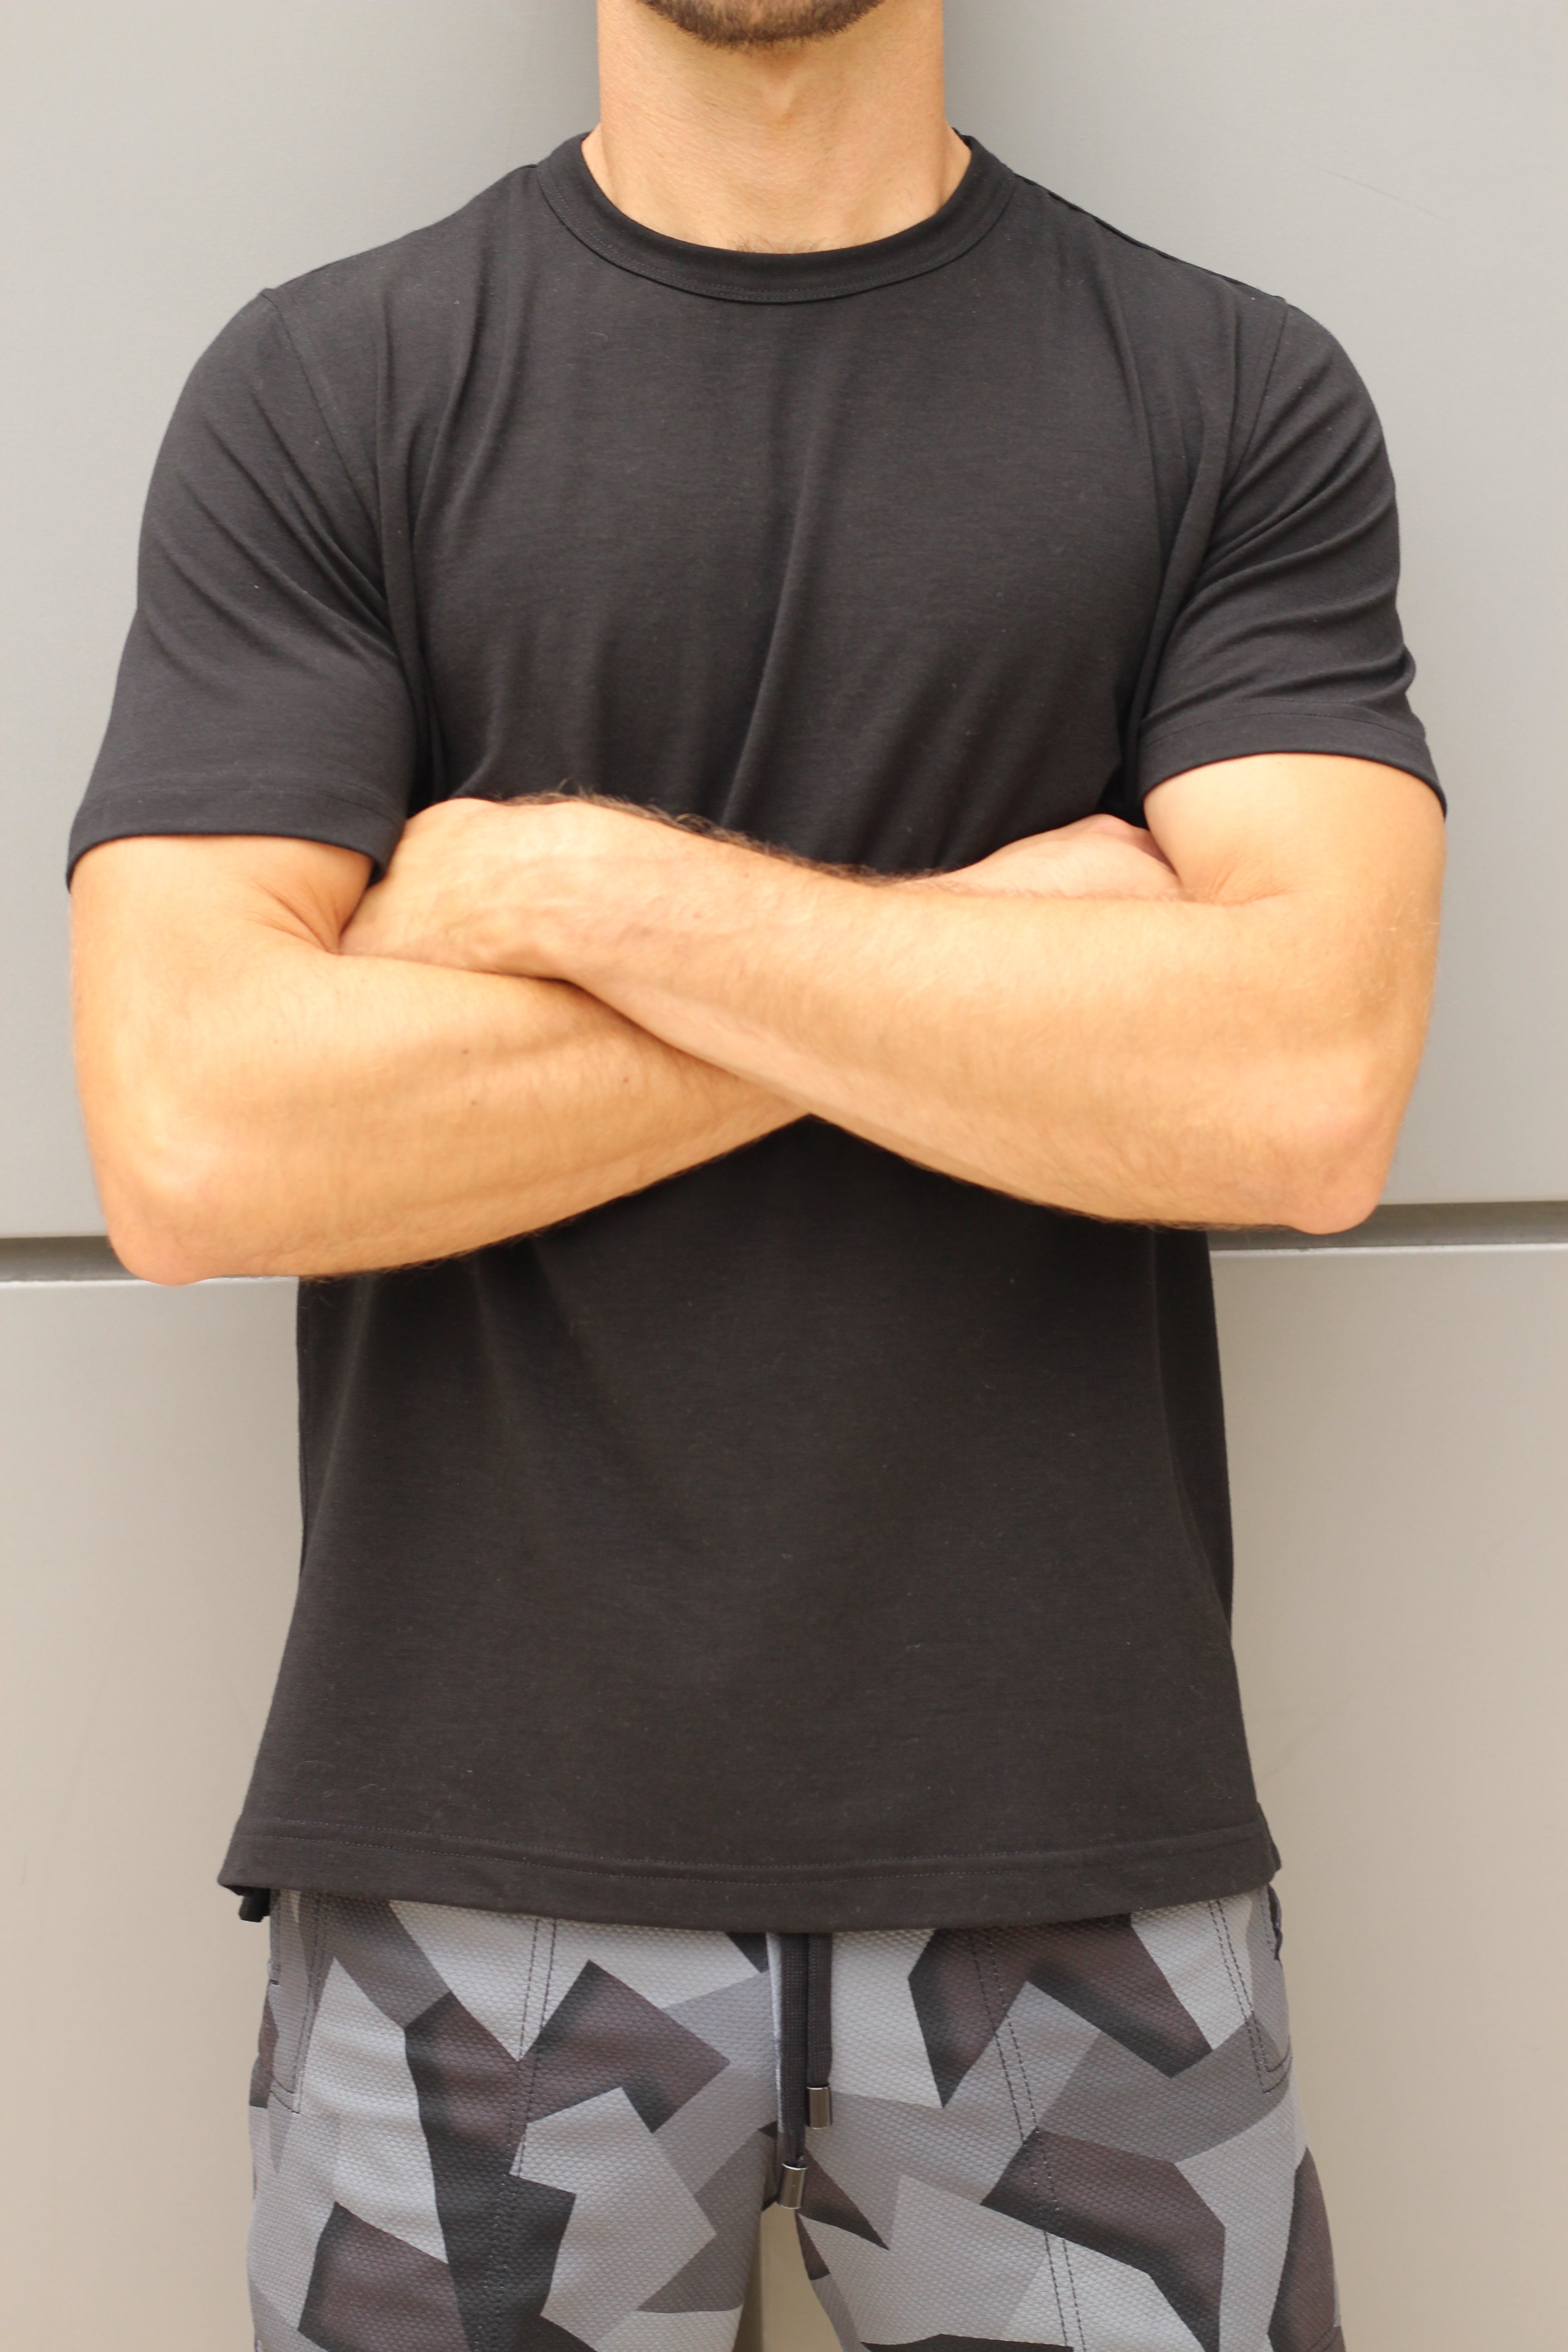 4 Reasons Men Are Buying Leisure Lab T-shirts